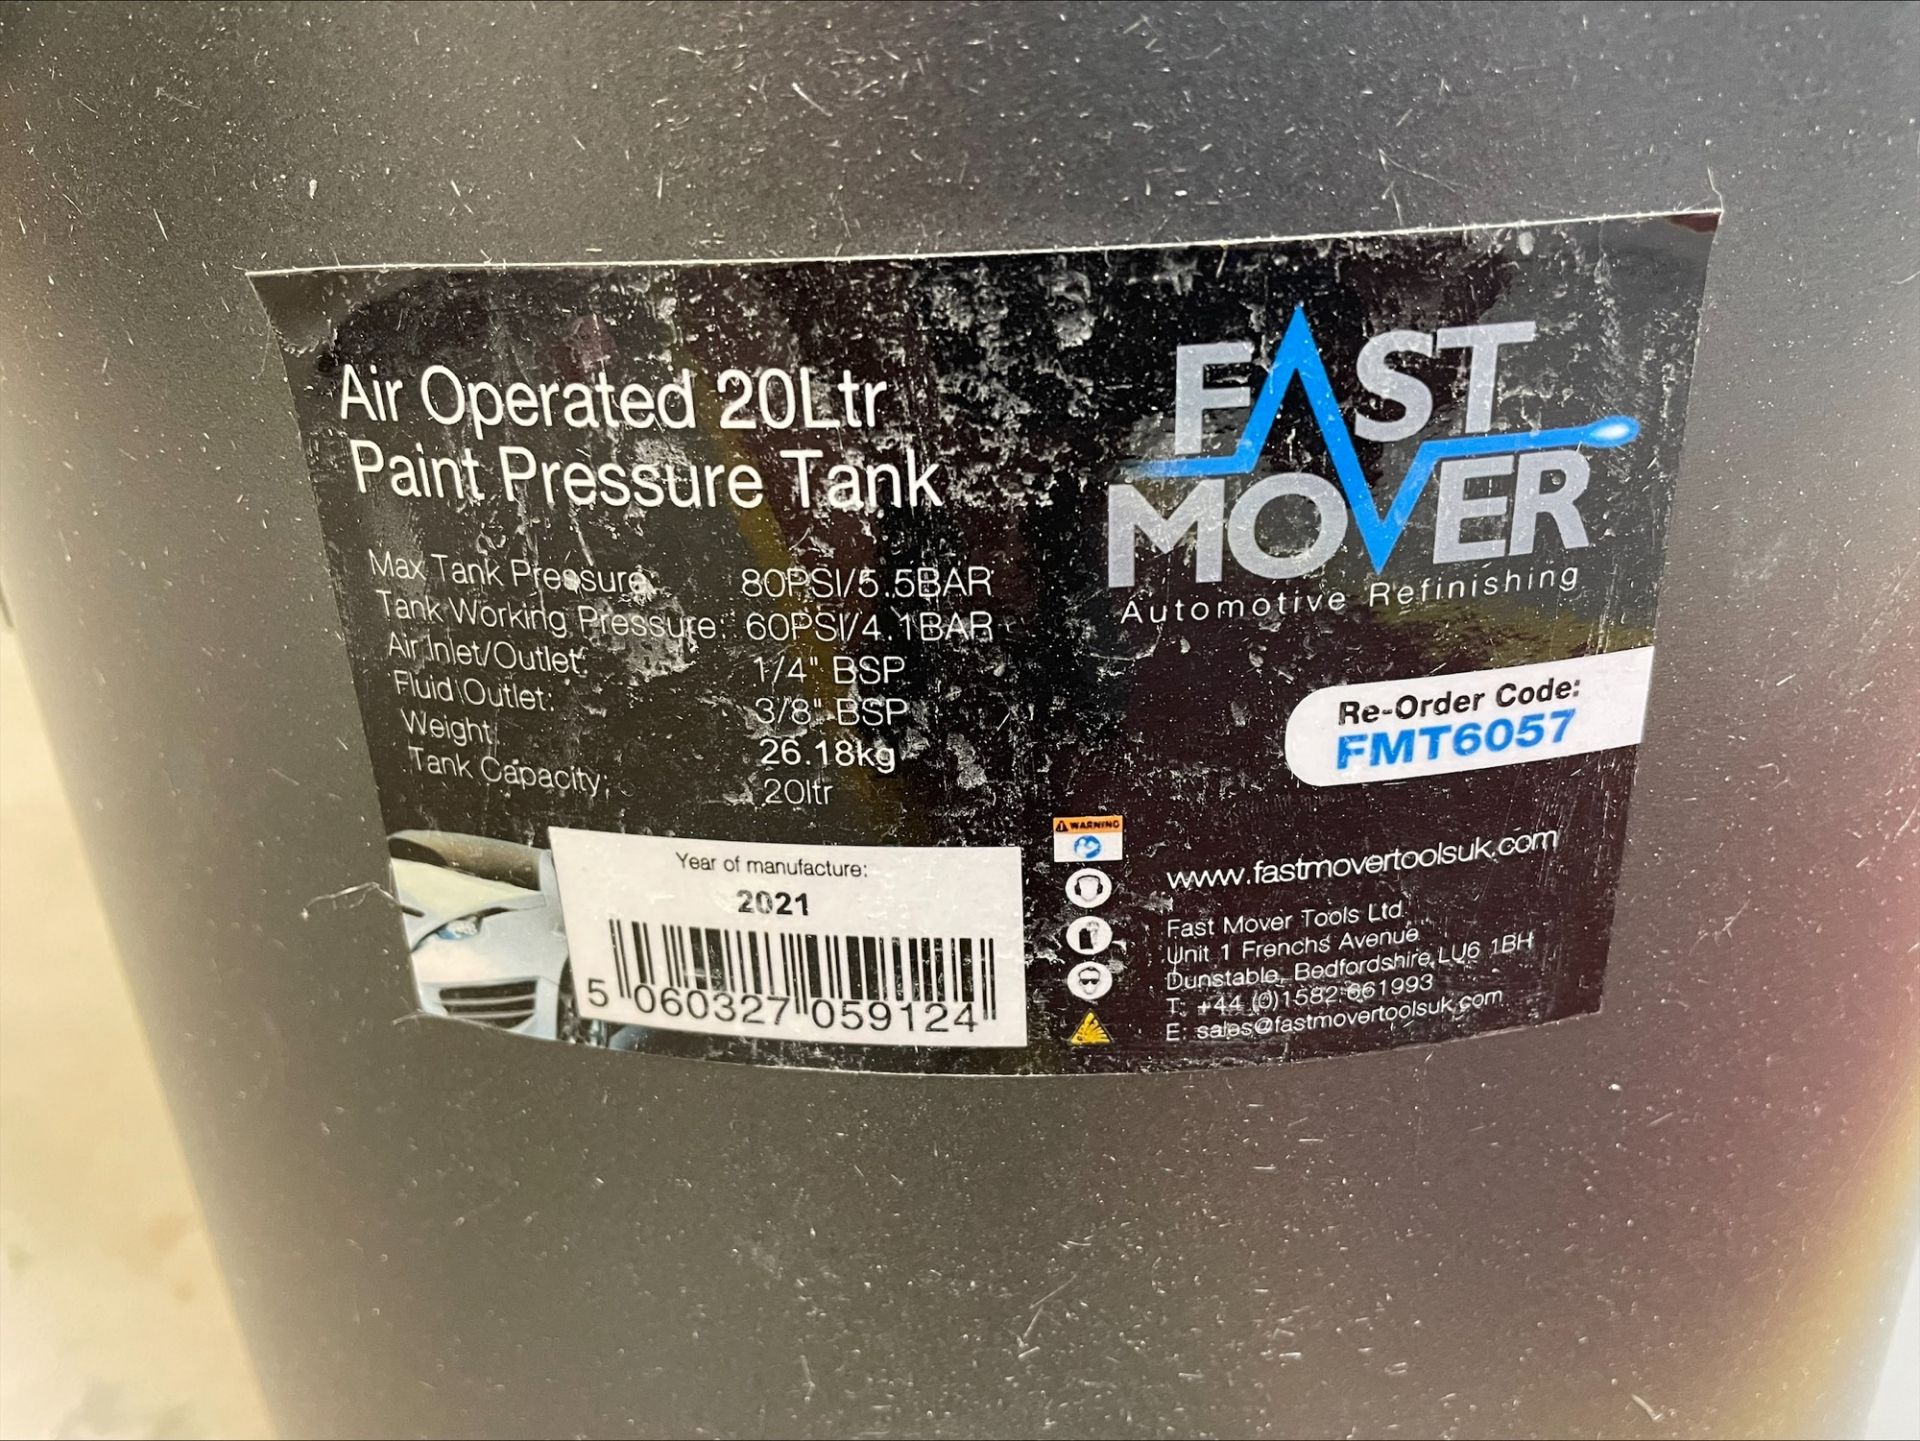 Fast Mover FMT 6057 air operated 20 litre paint pressure tank (2021) - Image 2 of 3